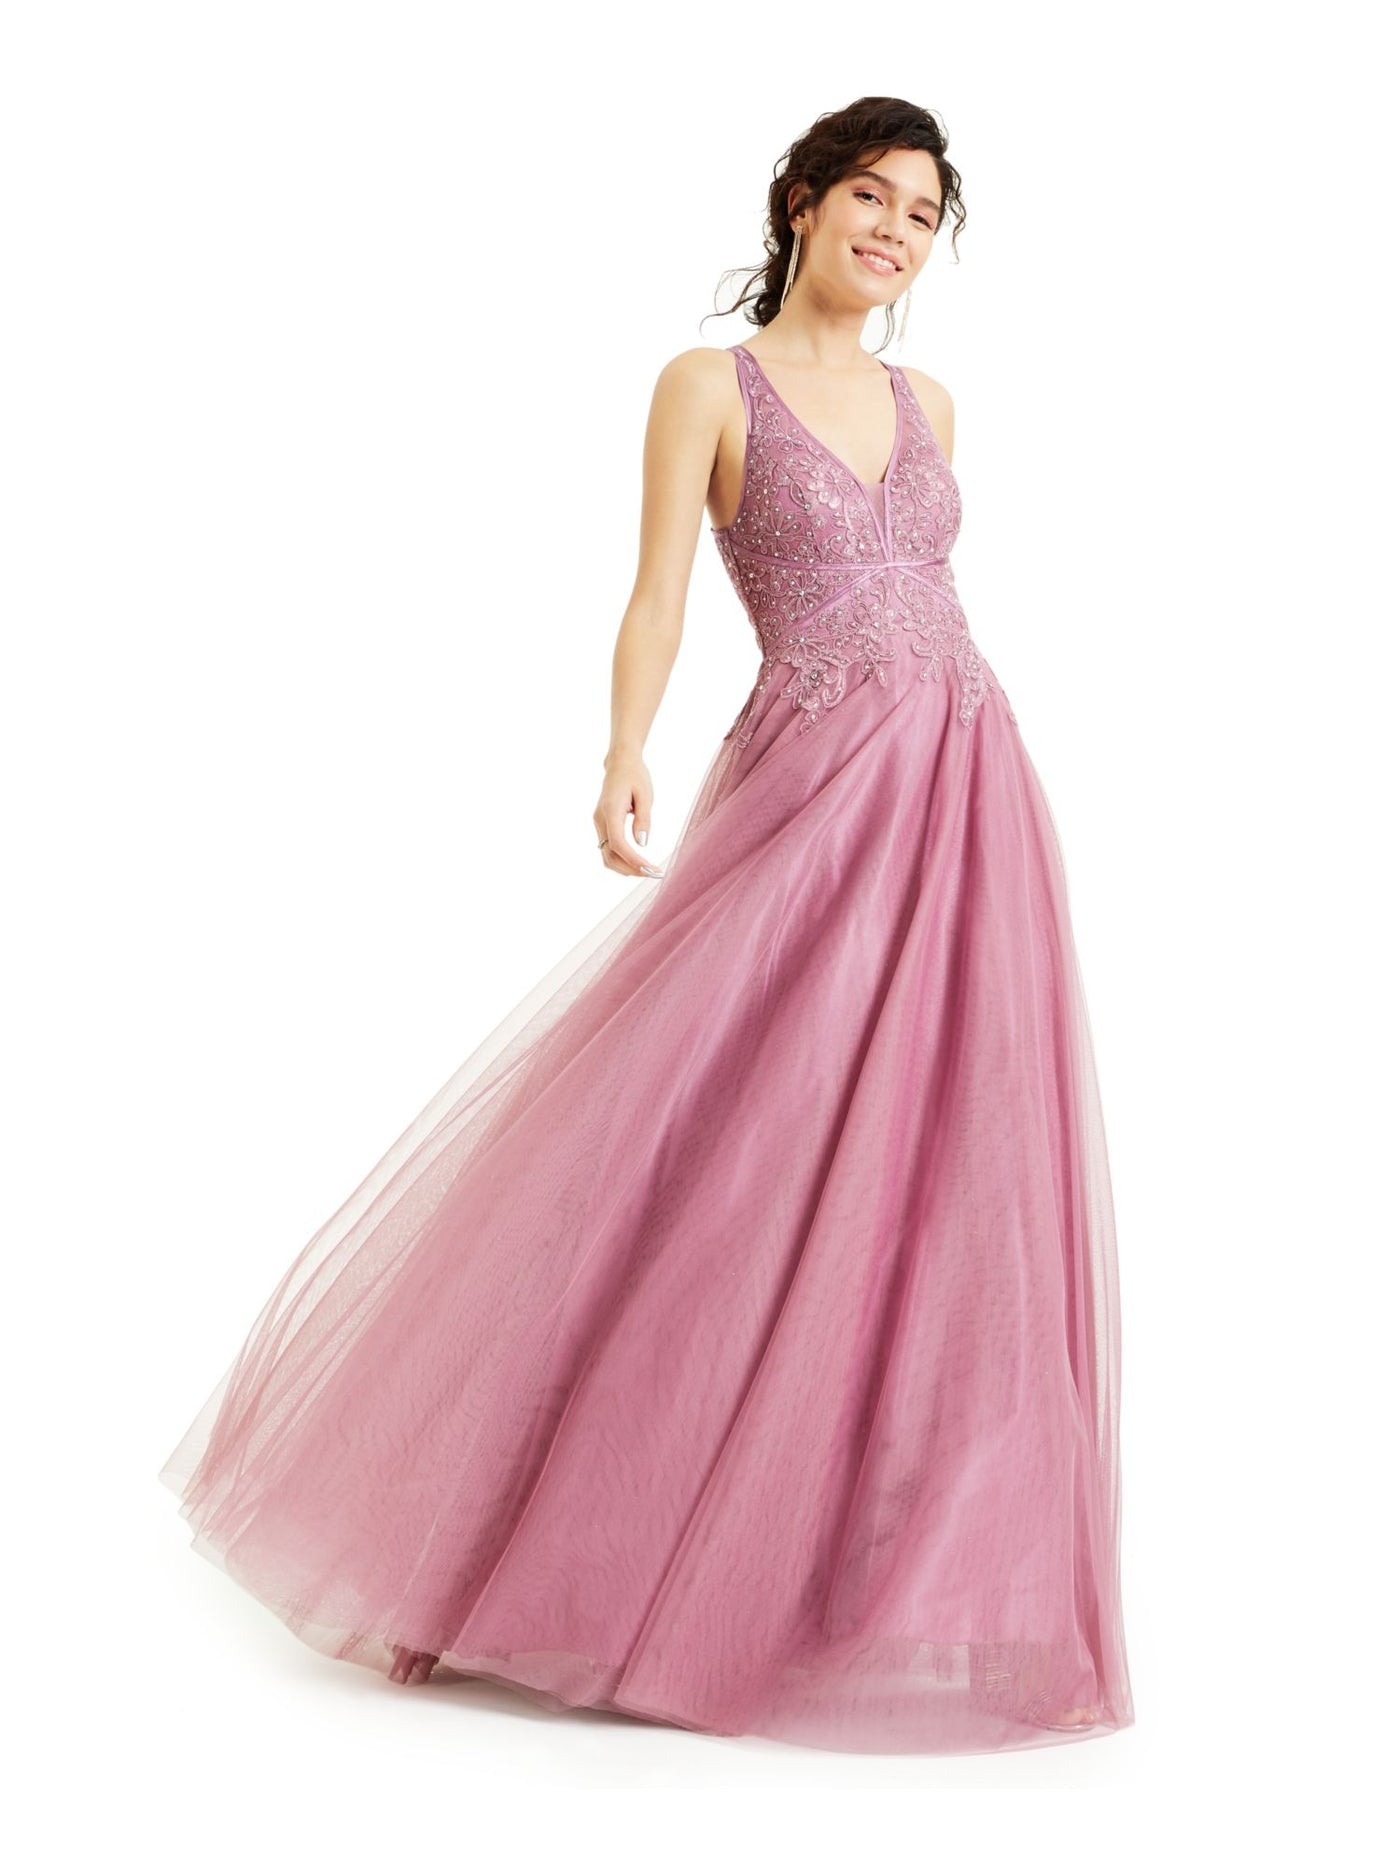 SAY YES TO THE PROM Womens Embellished Sequined Spaghetti Strap Sweetheart Neckline Full-Length Formal Fit + Flare Dress